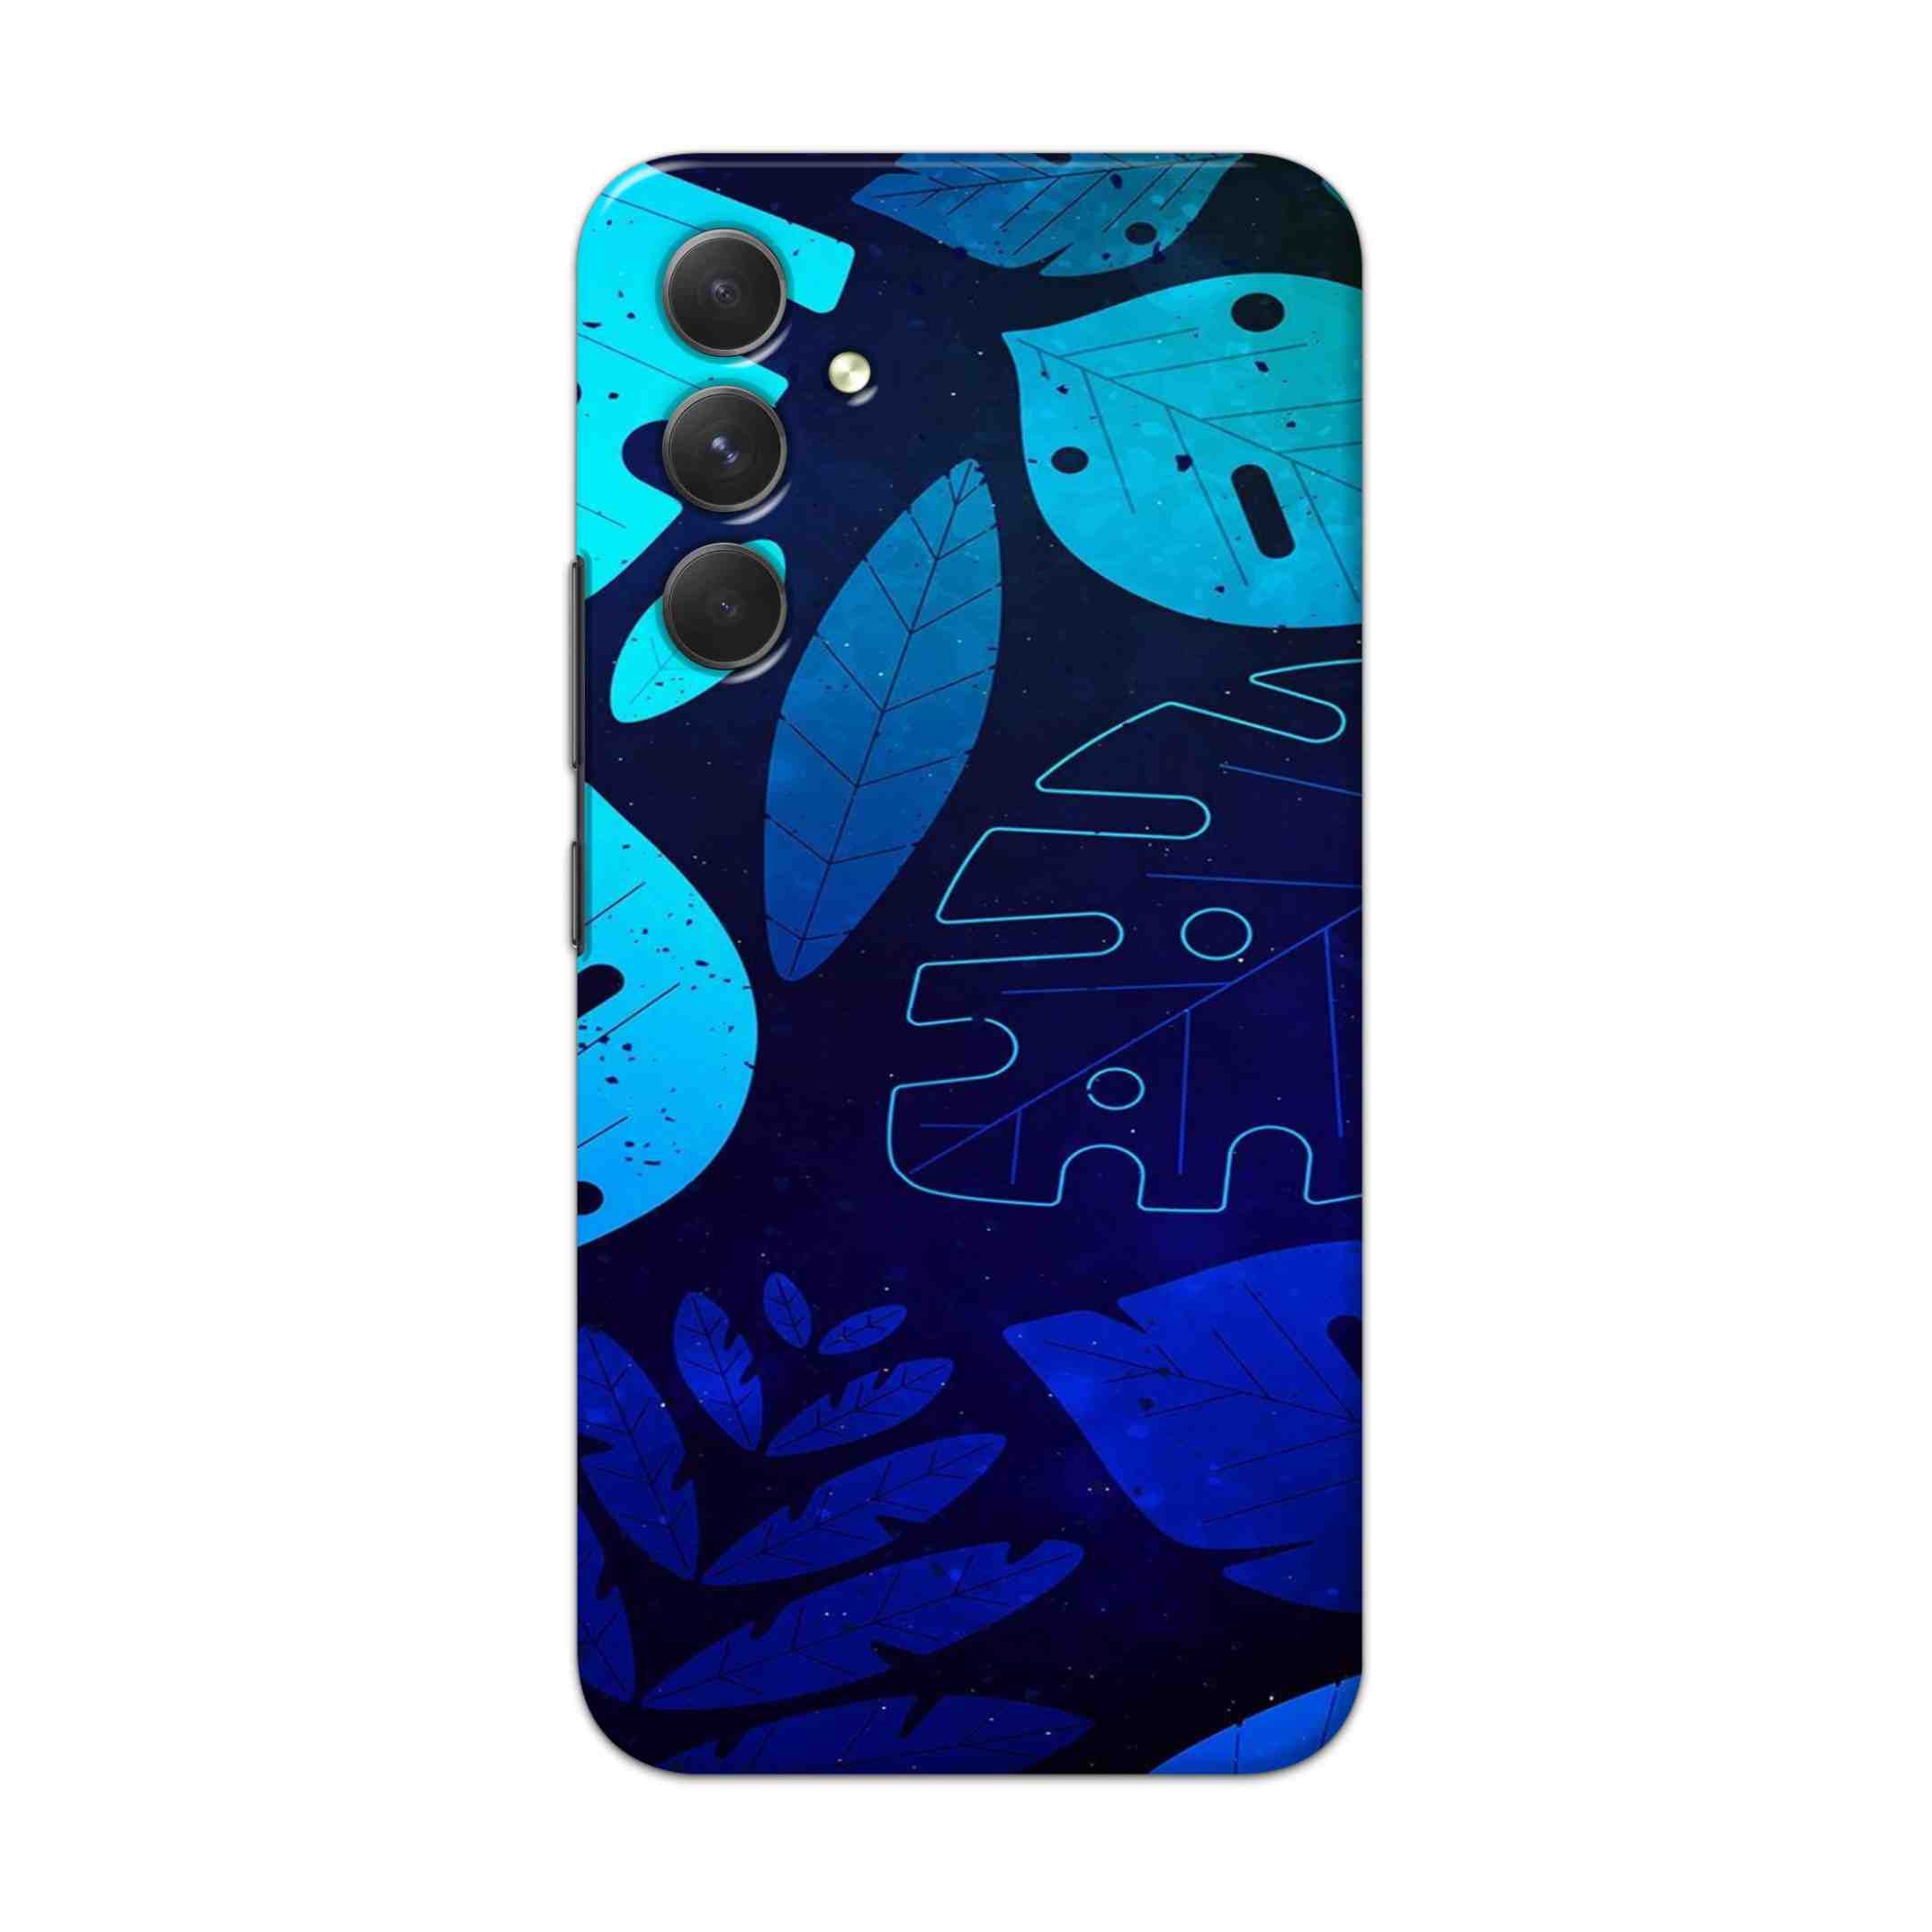 Buy Neon Leaf Hard Back Mobile Phone Case Cover For Samsung Galaxy A54 5G Online